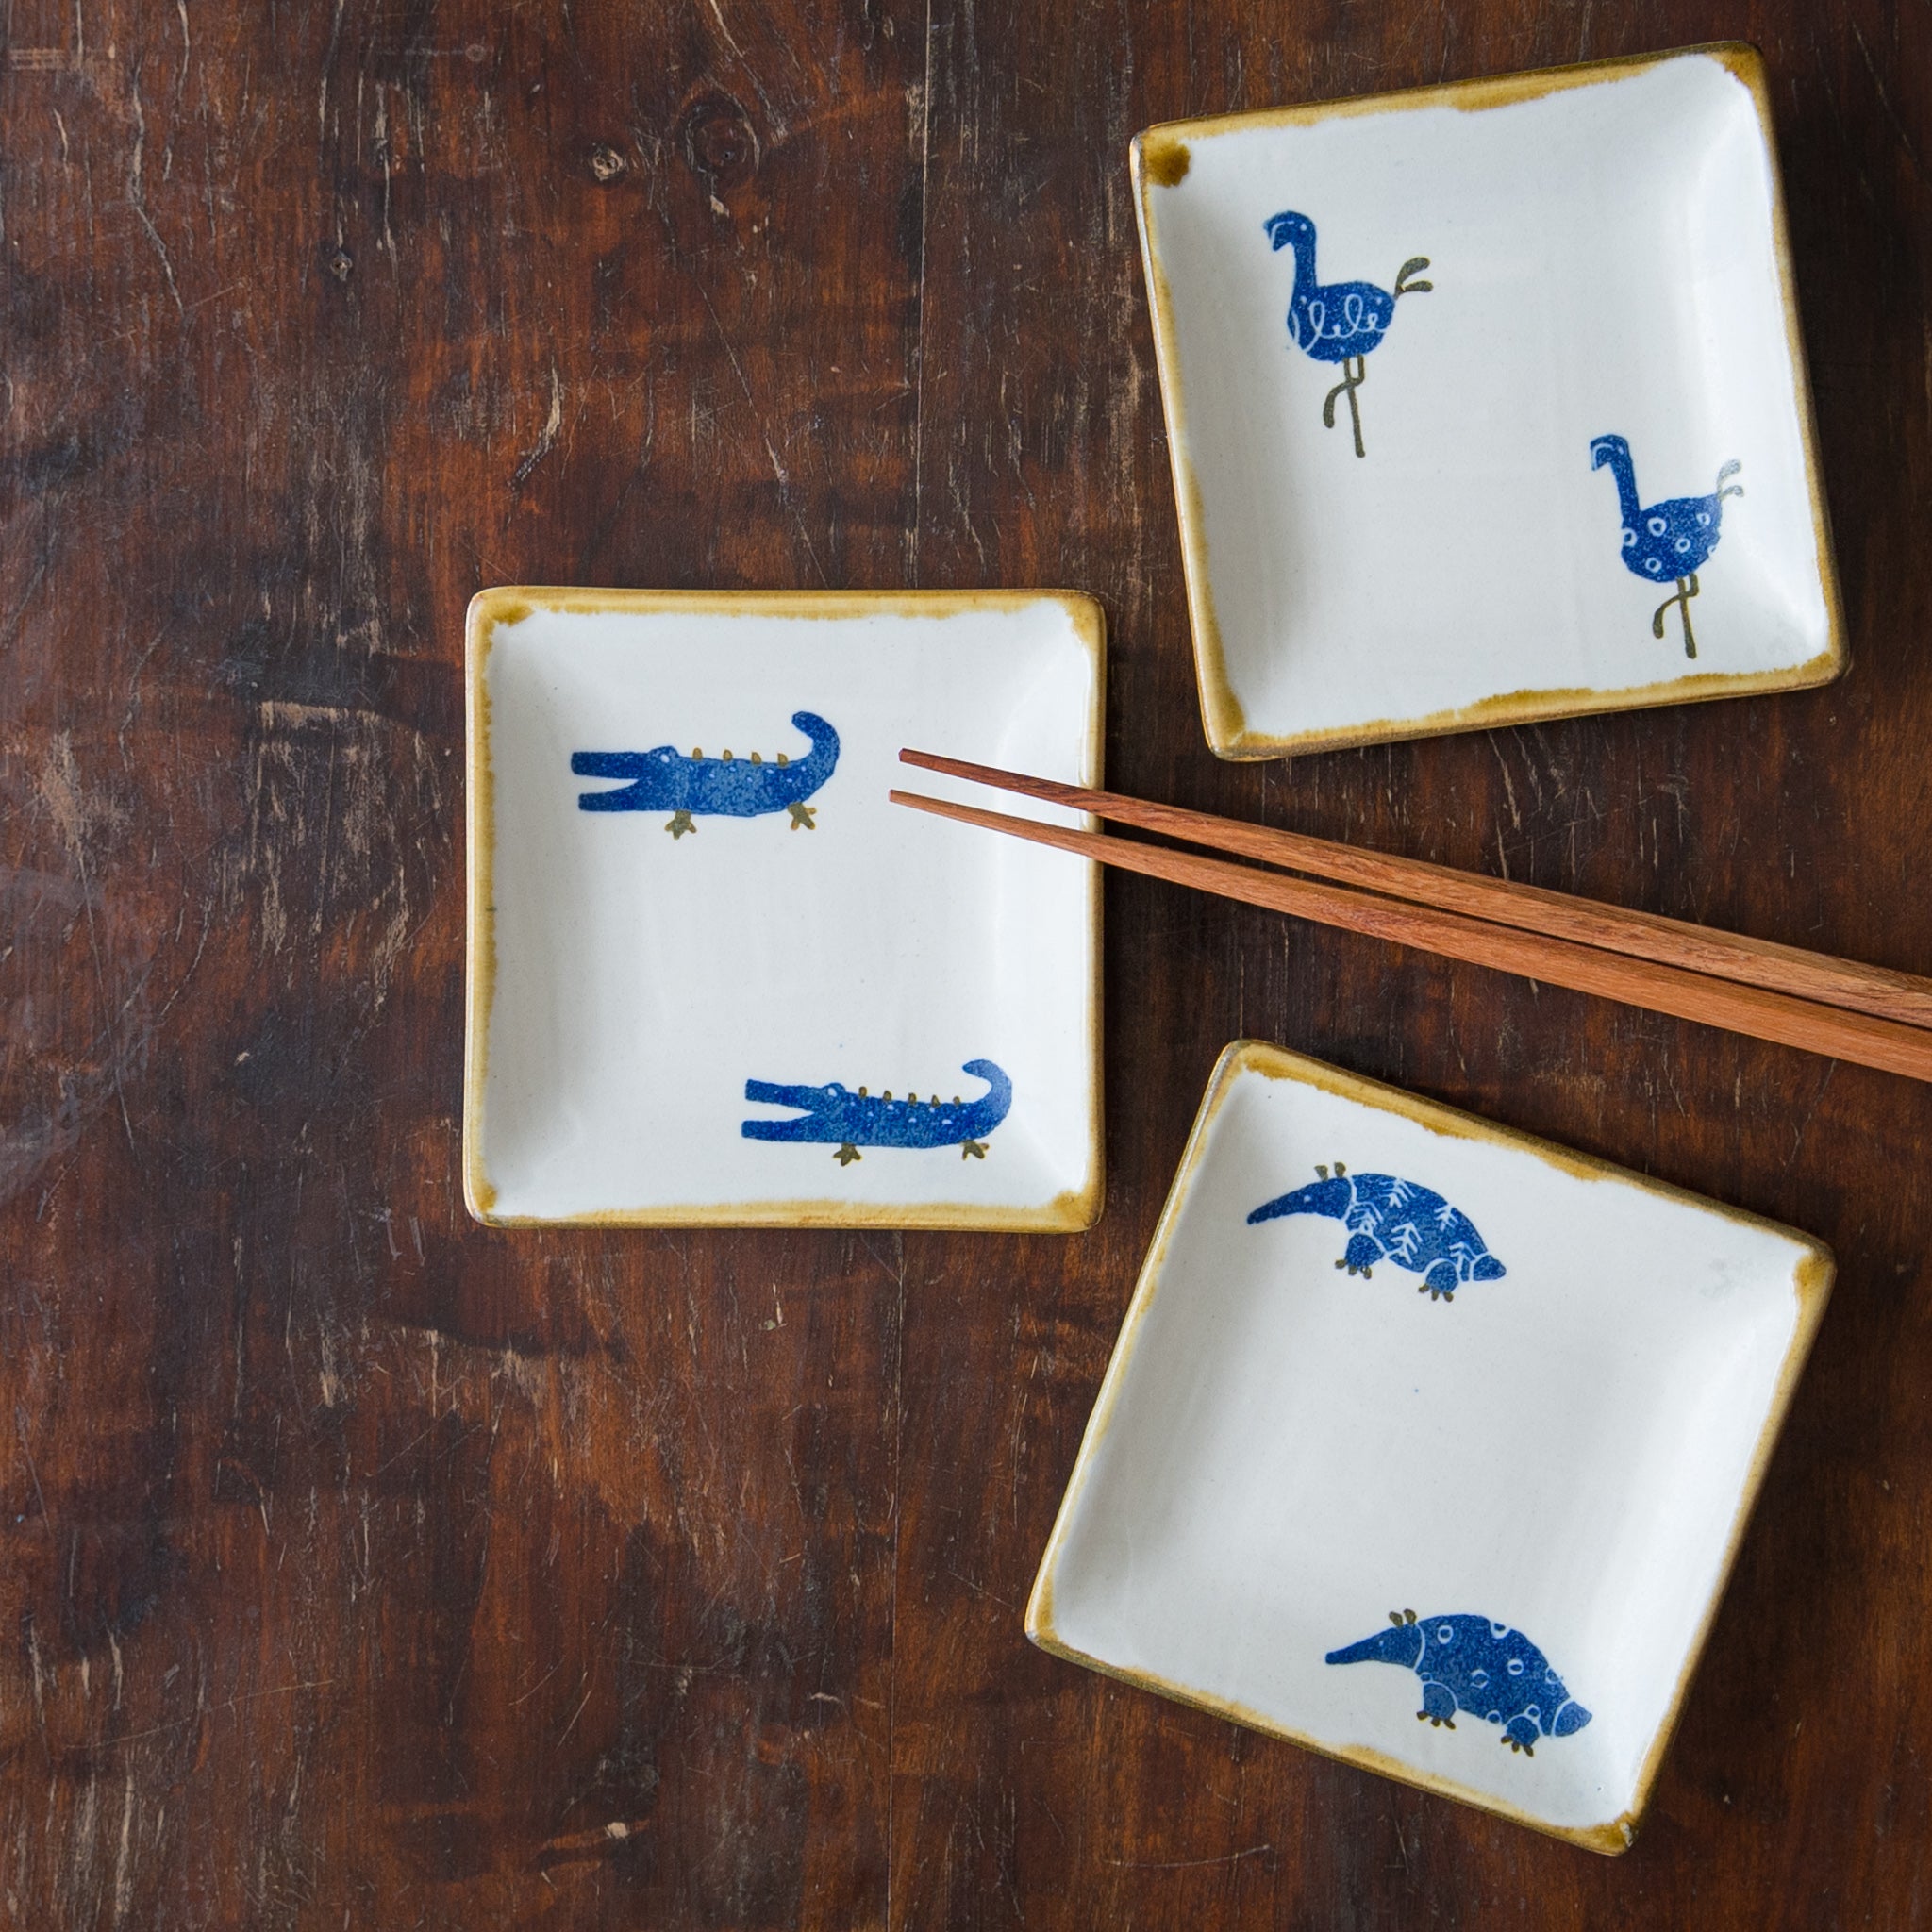 A corner small plate from Yasumi Koubou's Japanese paper dyed animal series that is perfect for a little side dish.